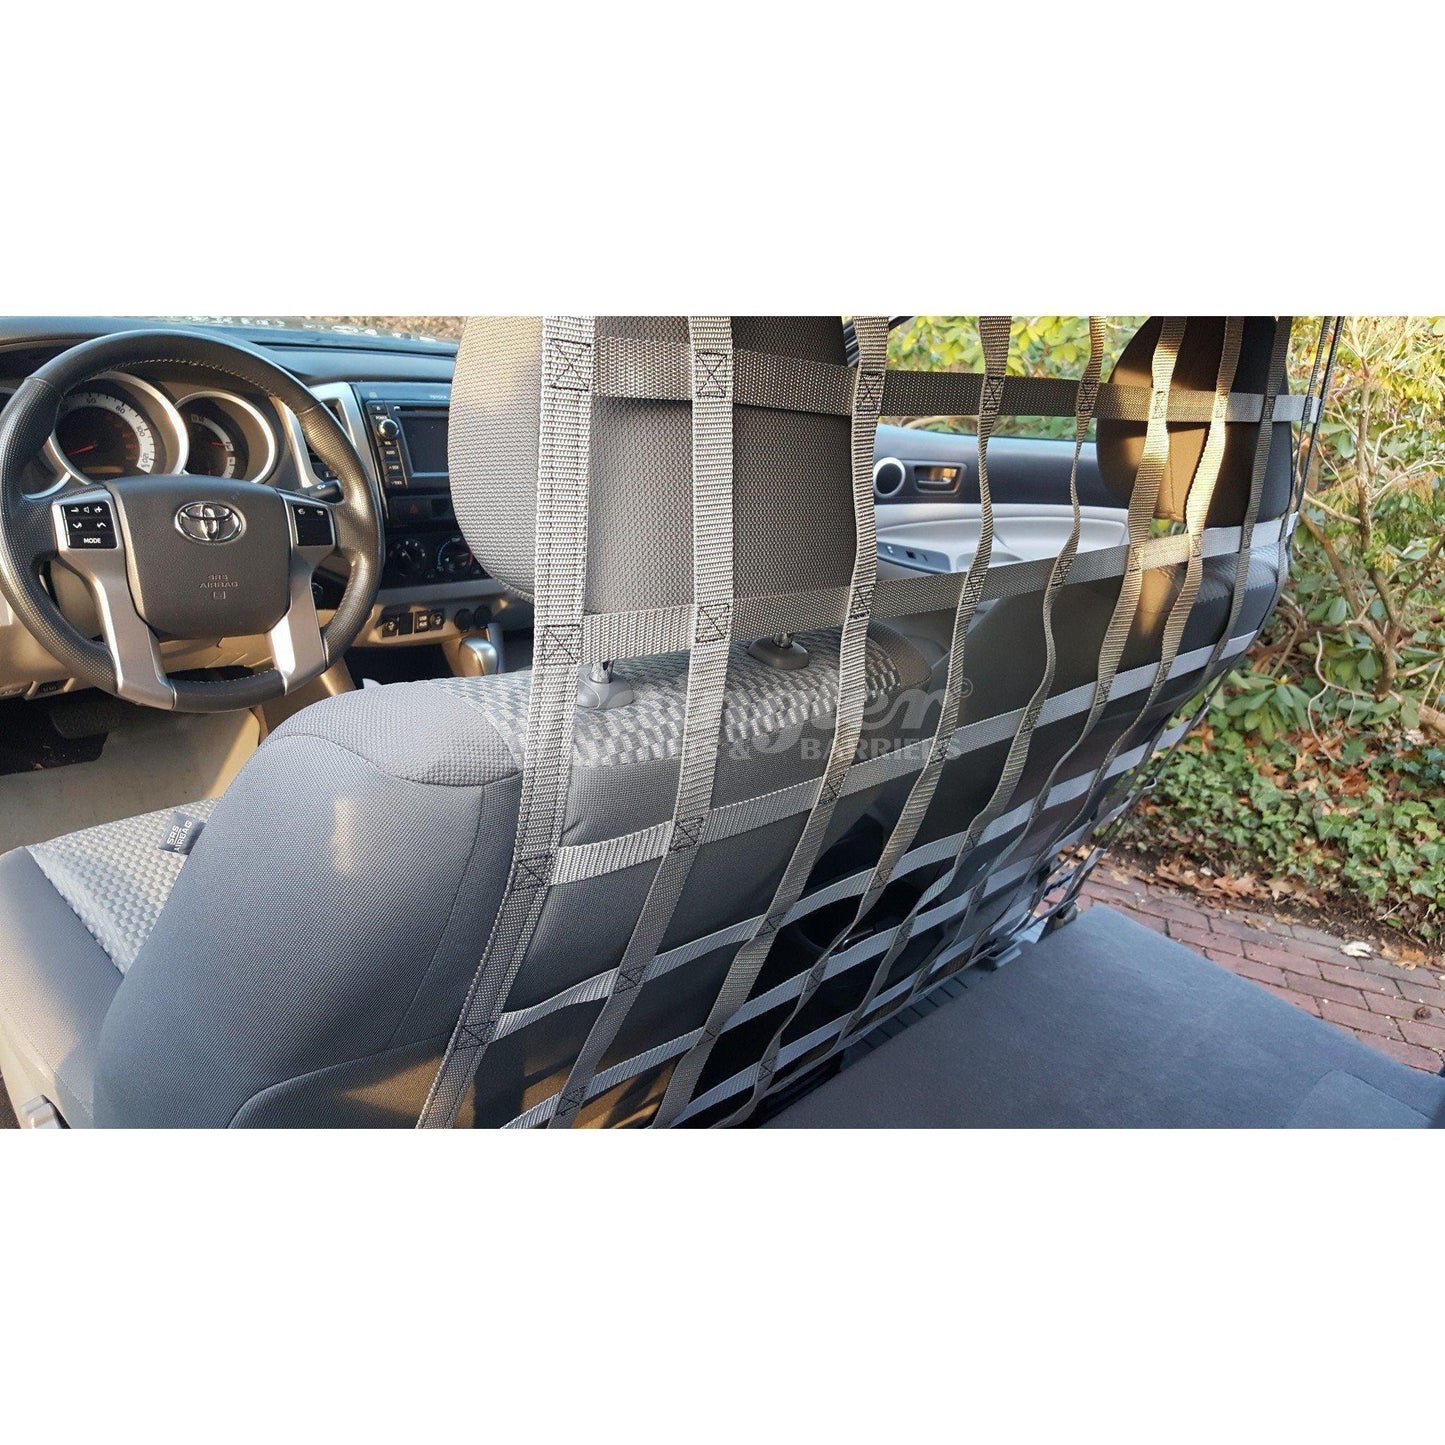 2005 -2015 Toyota Tacoma Access Cab / Double Cab Behind Front Seat Barrier Divider Net